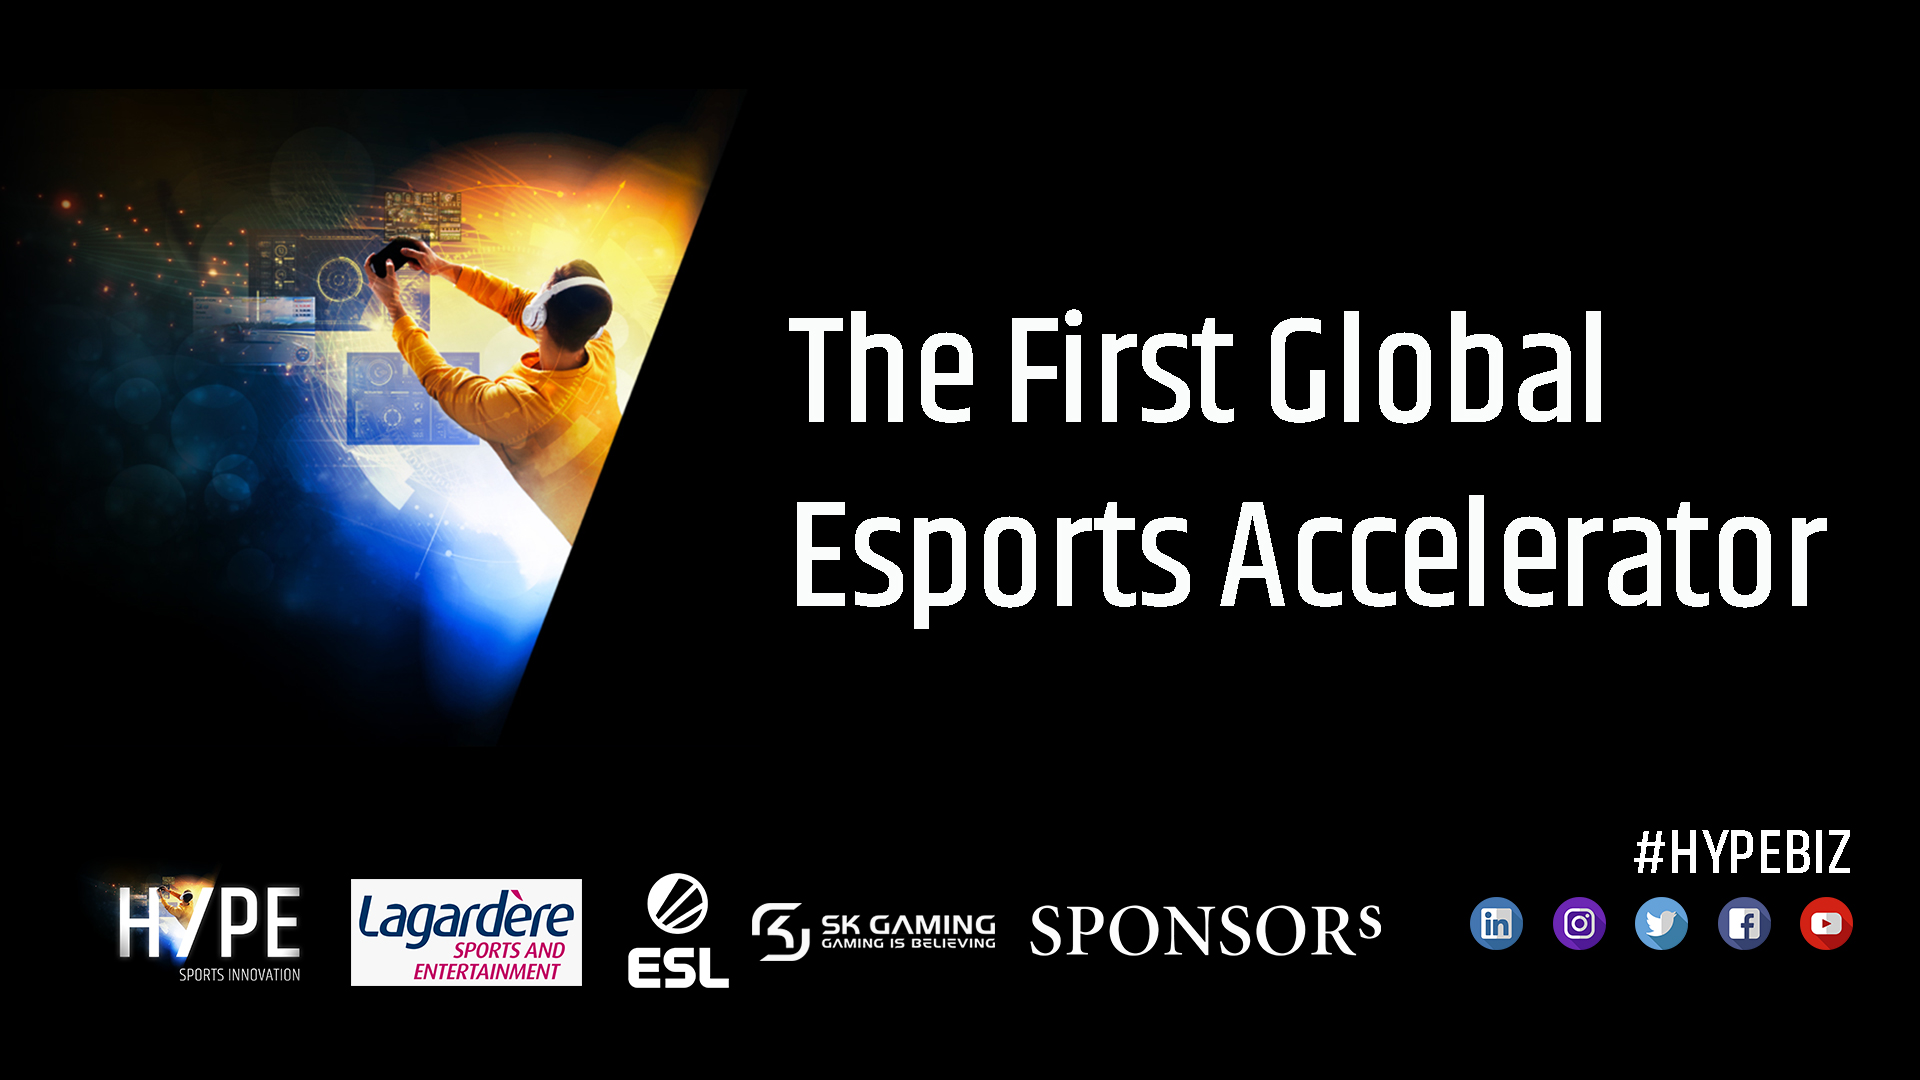 HYPE SPIN® Global Esports Accelerator